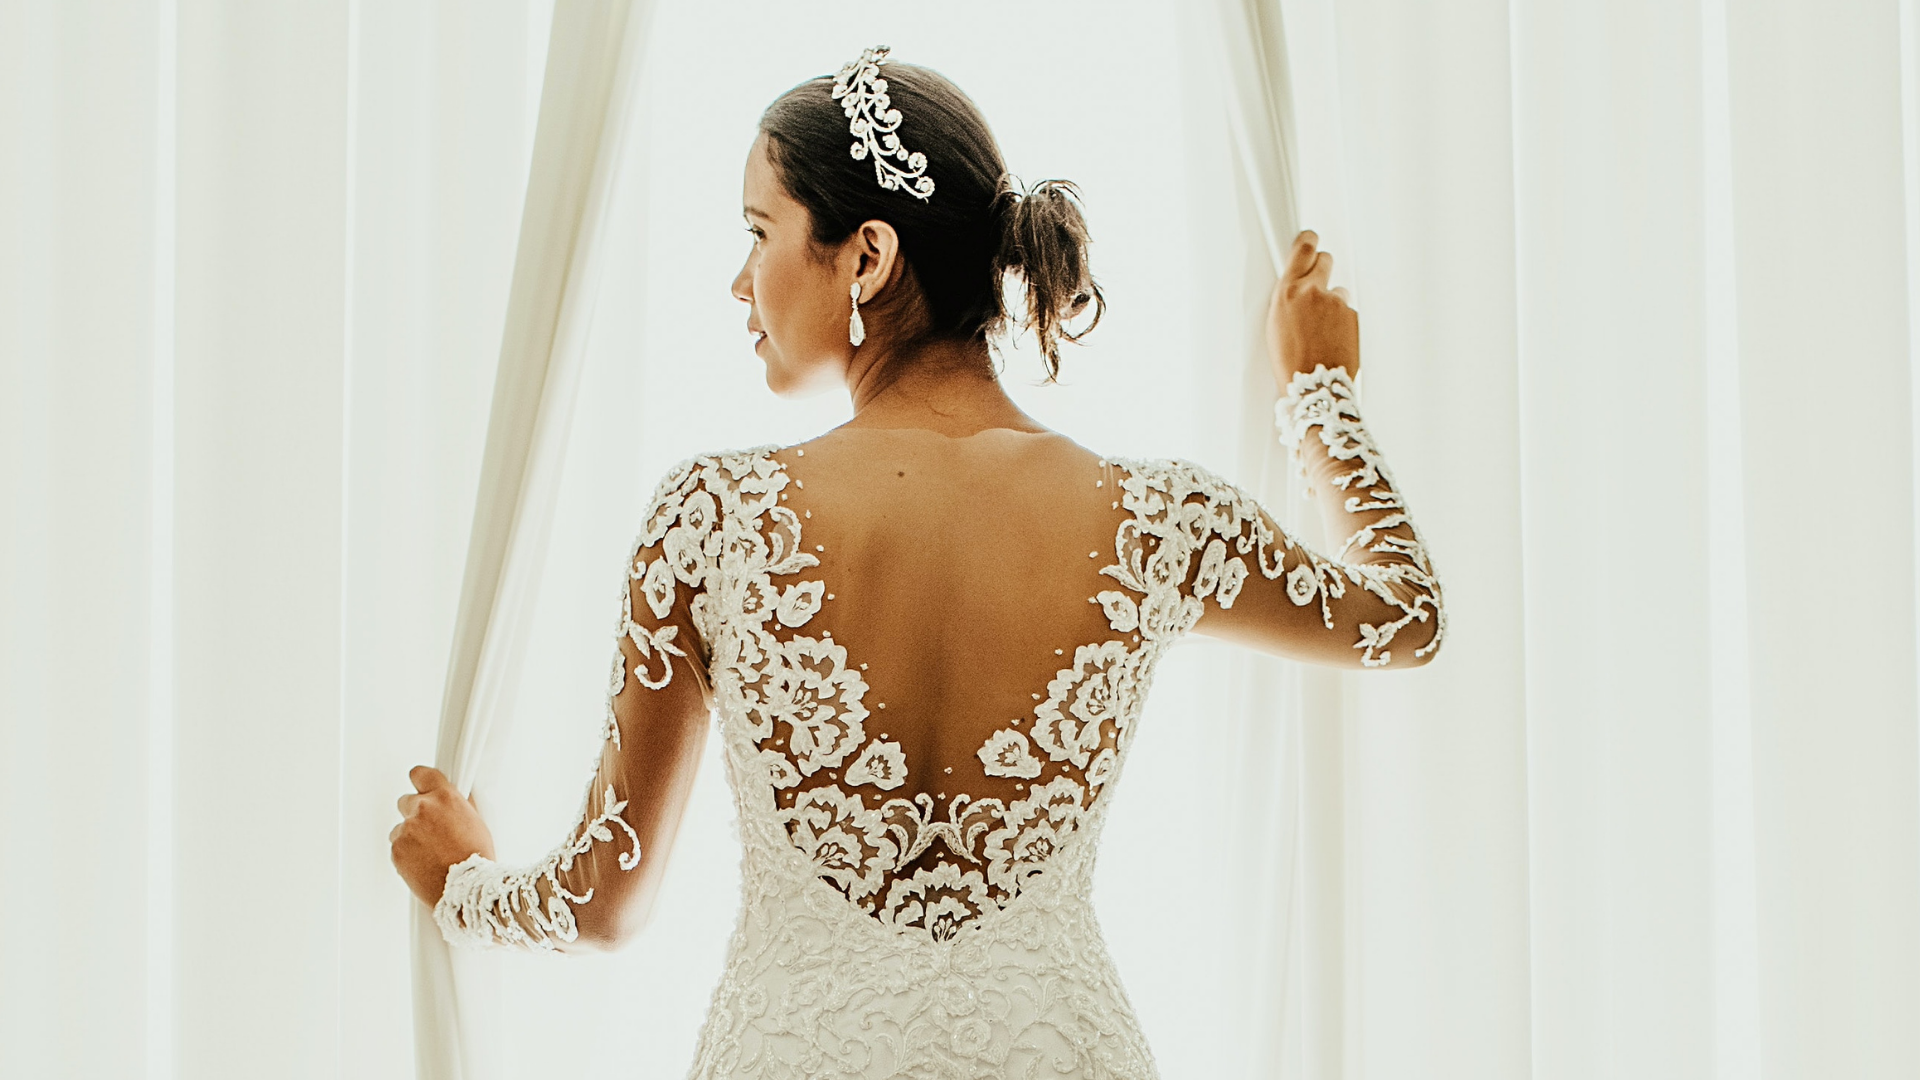 How to Brace Yourself for Wedding Dress Shopping